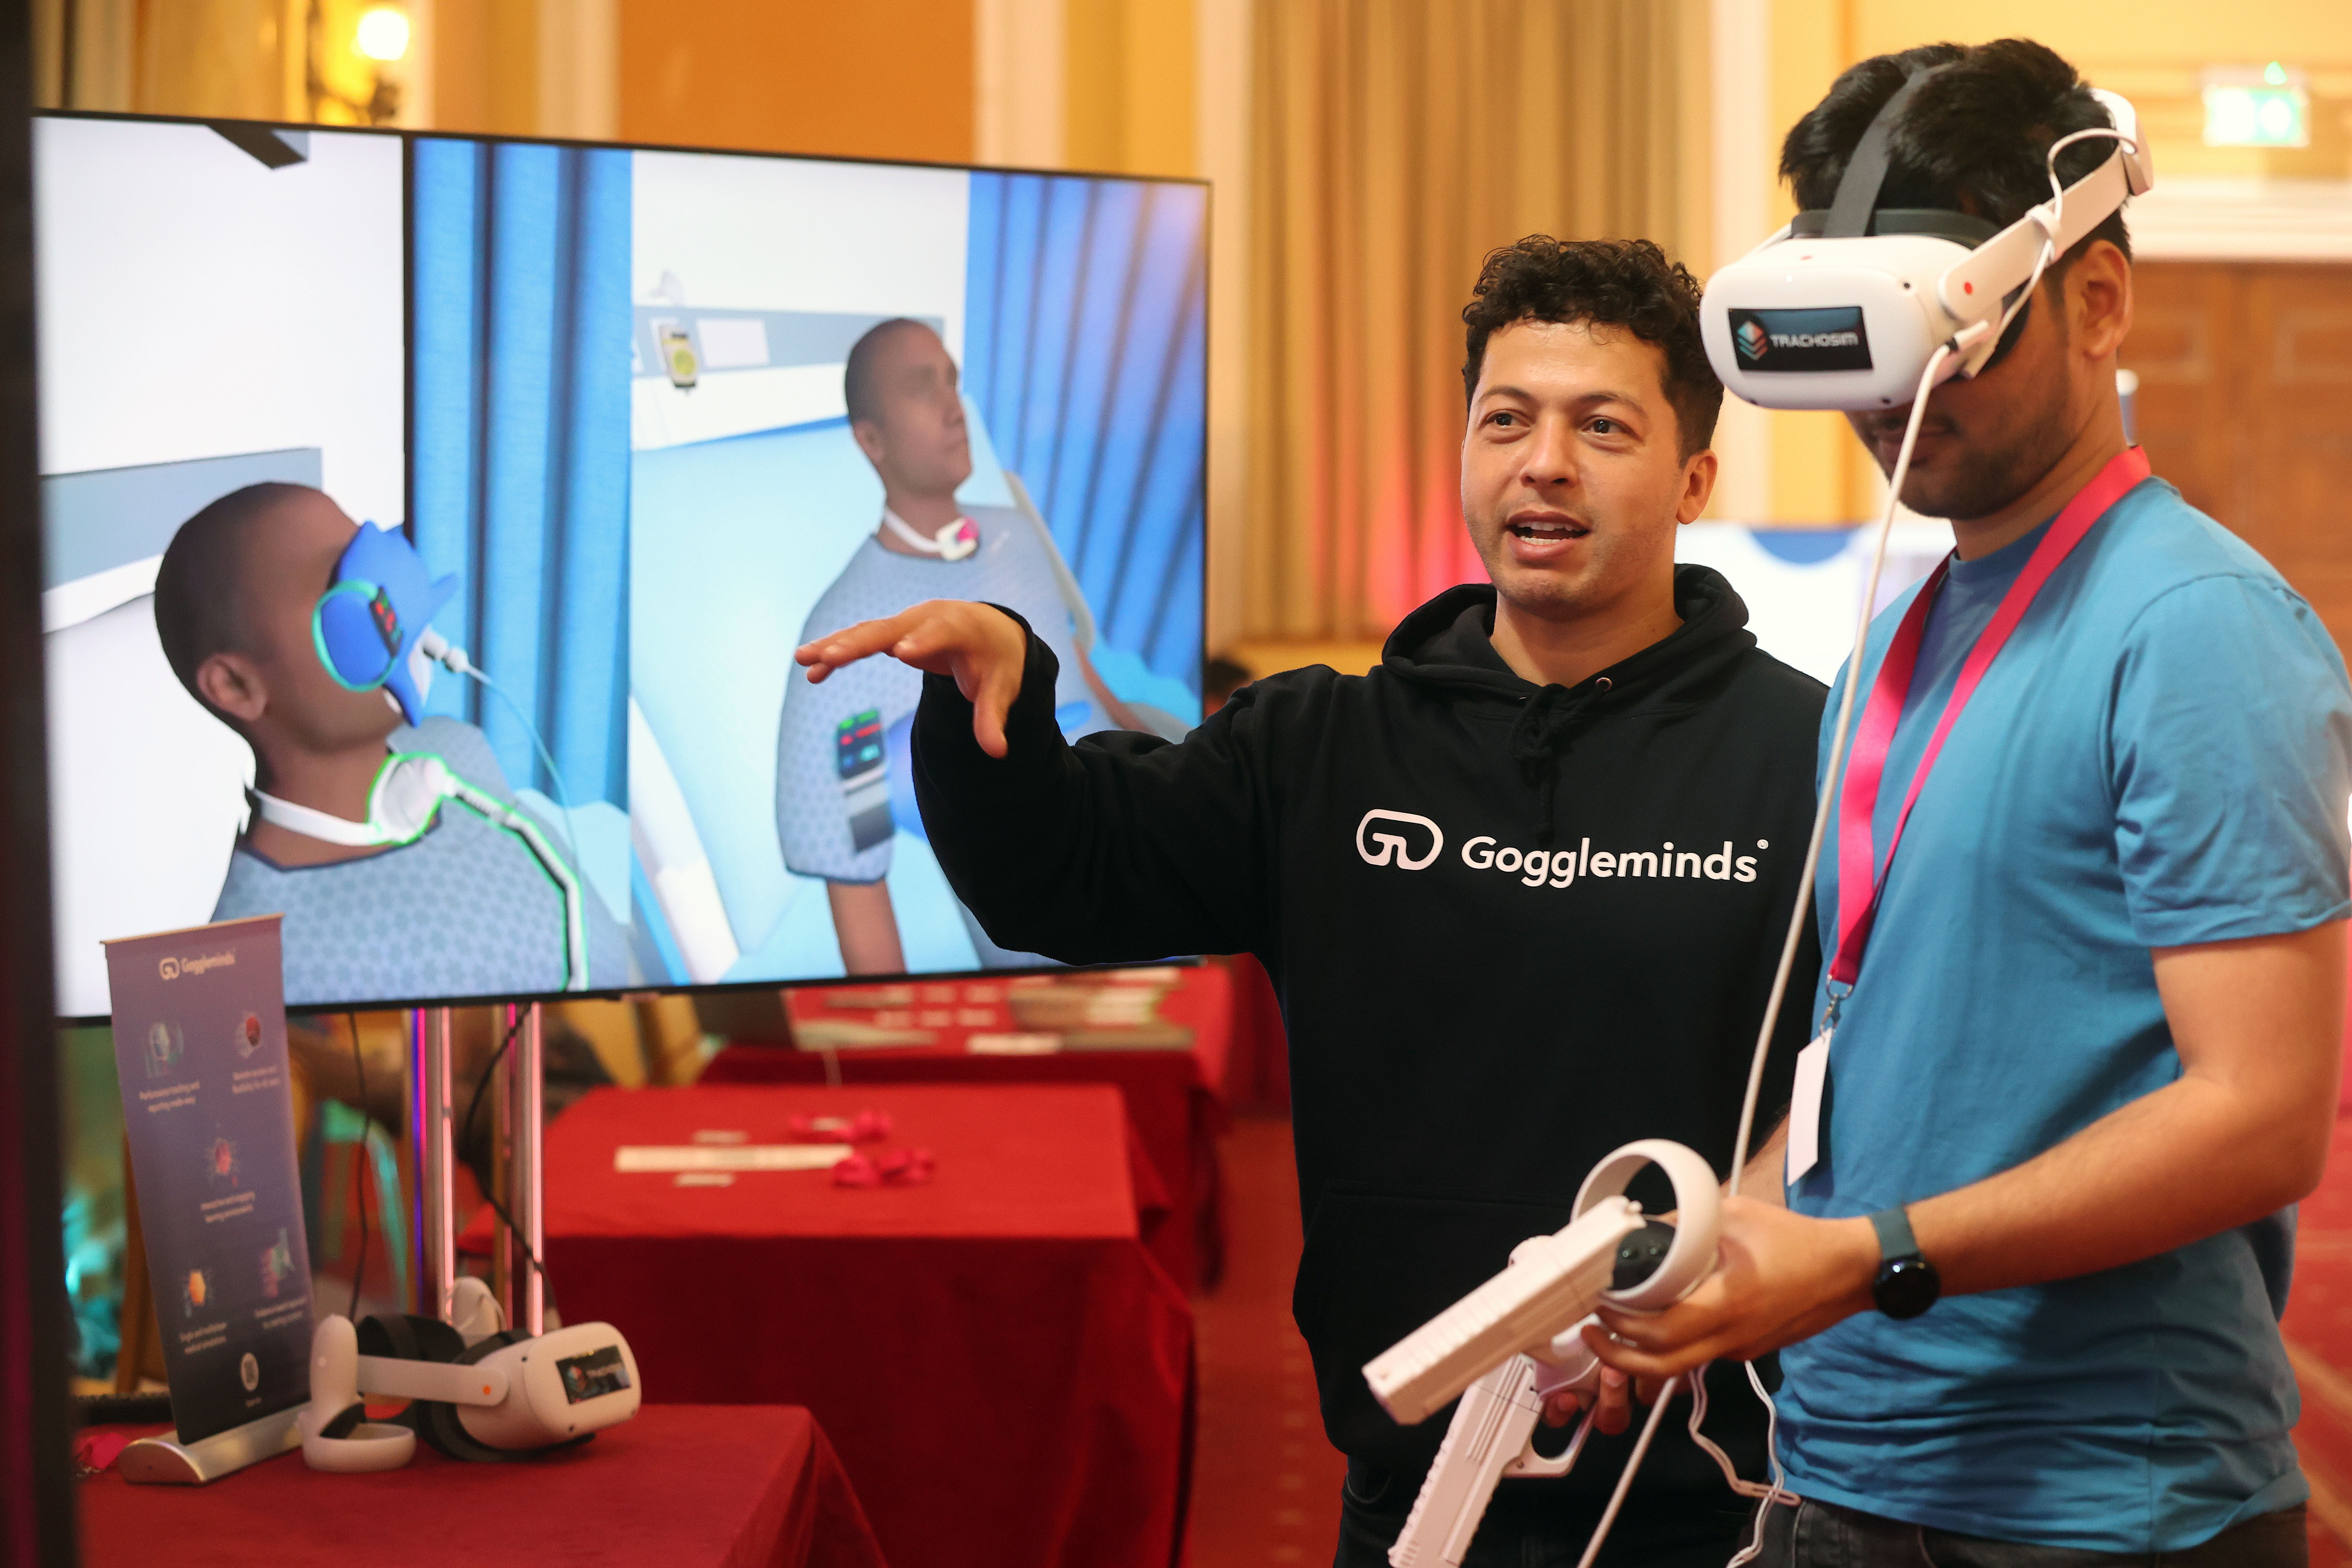 Azize Naji of Goggleminds demonstrates his R&D using a VR headset